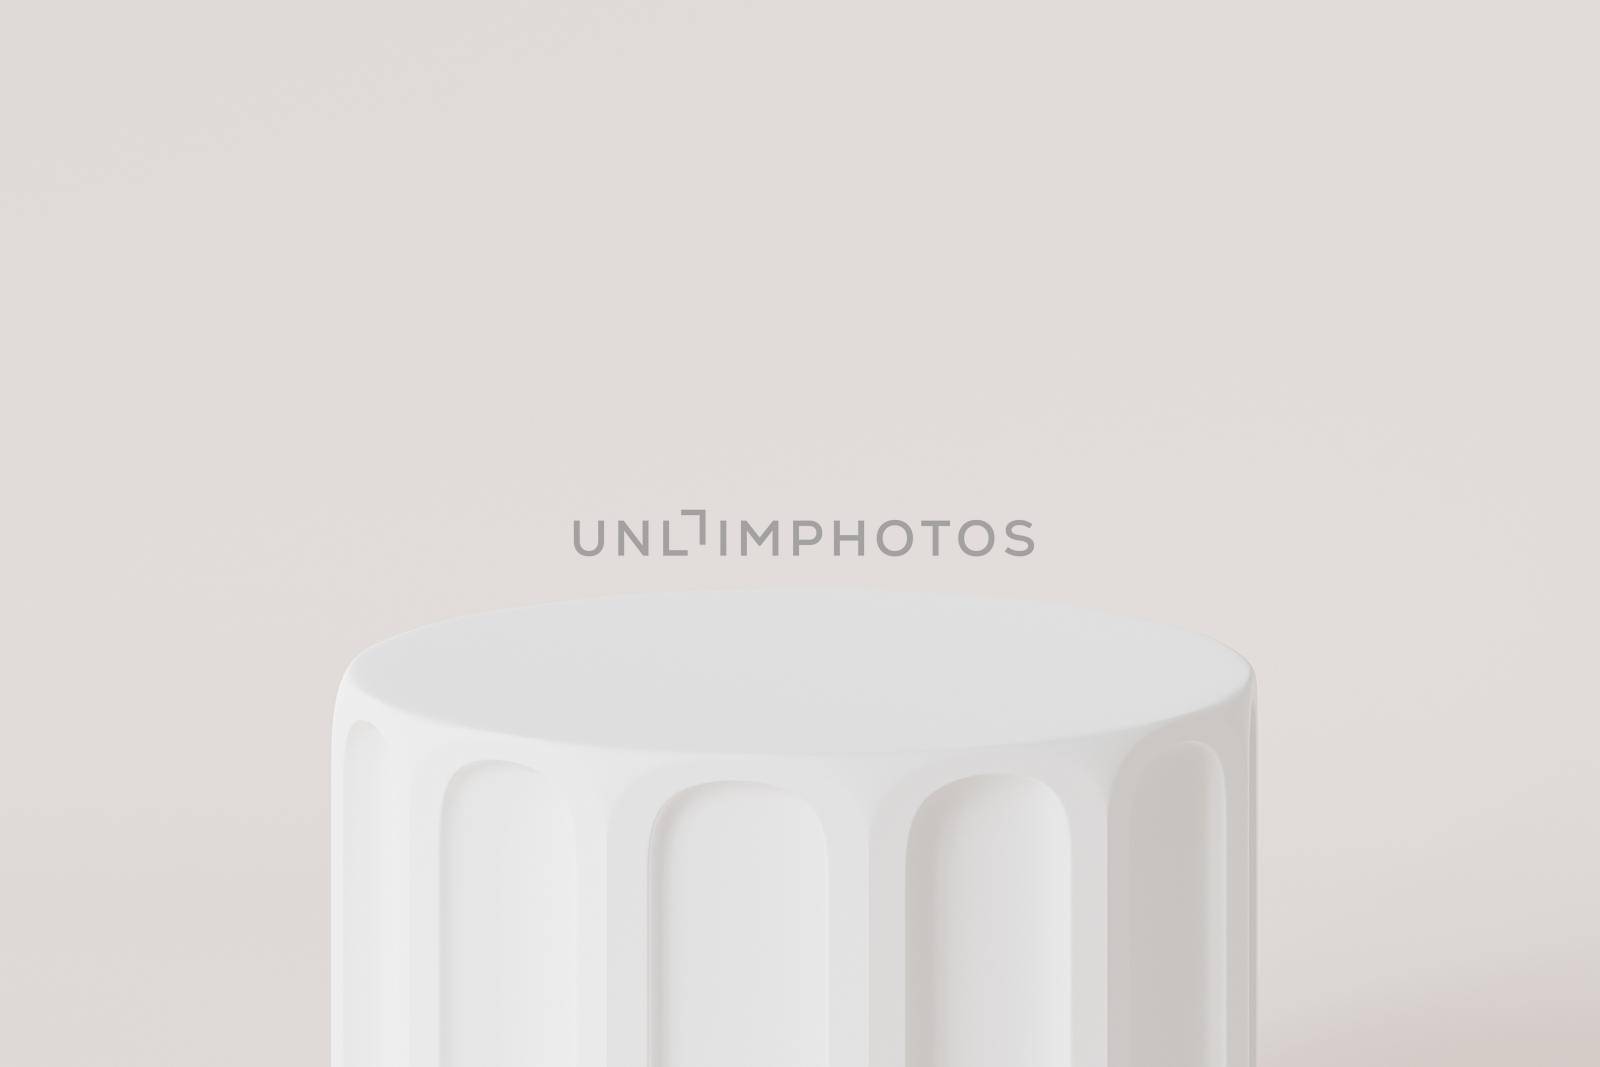 White pillar podium or pedestal for products or advertising, minimal 3d illustration render by Frostroomhead